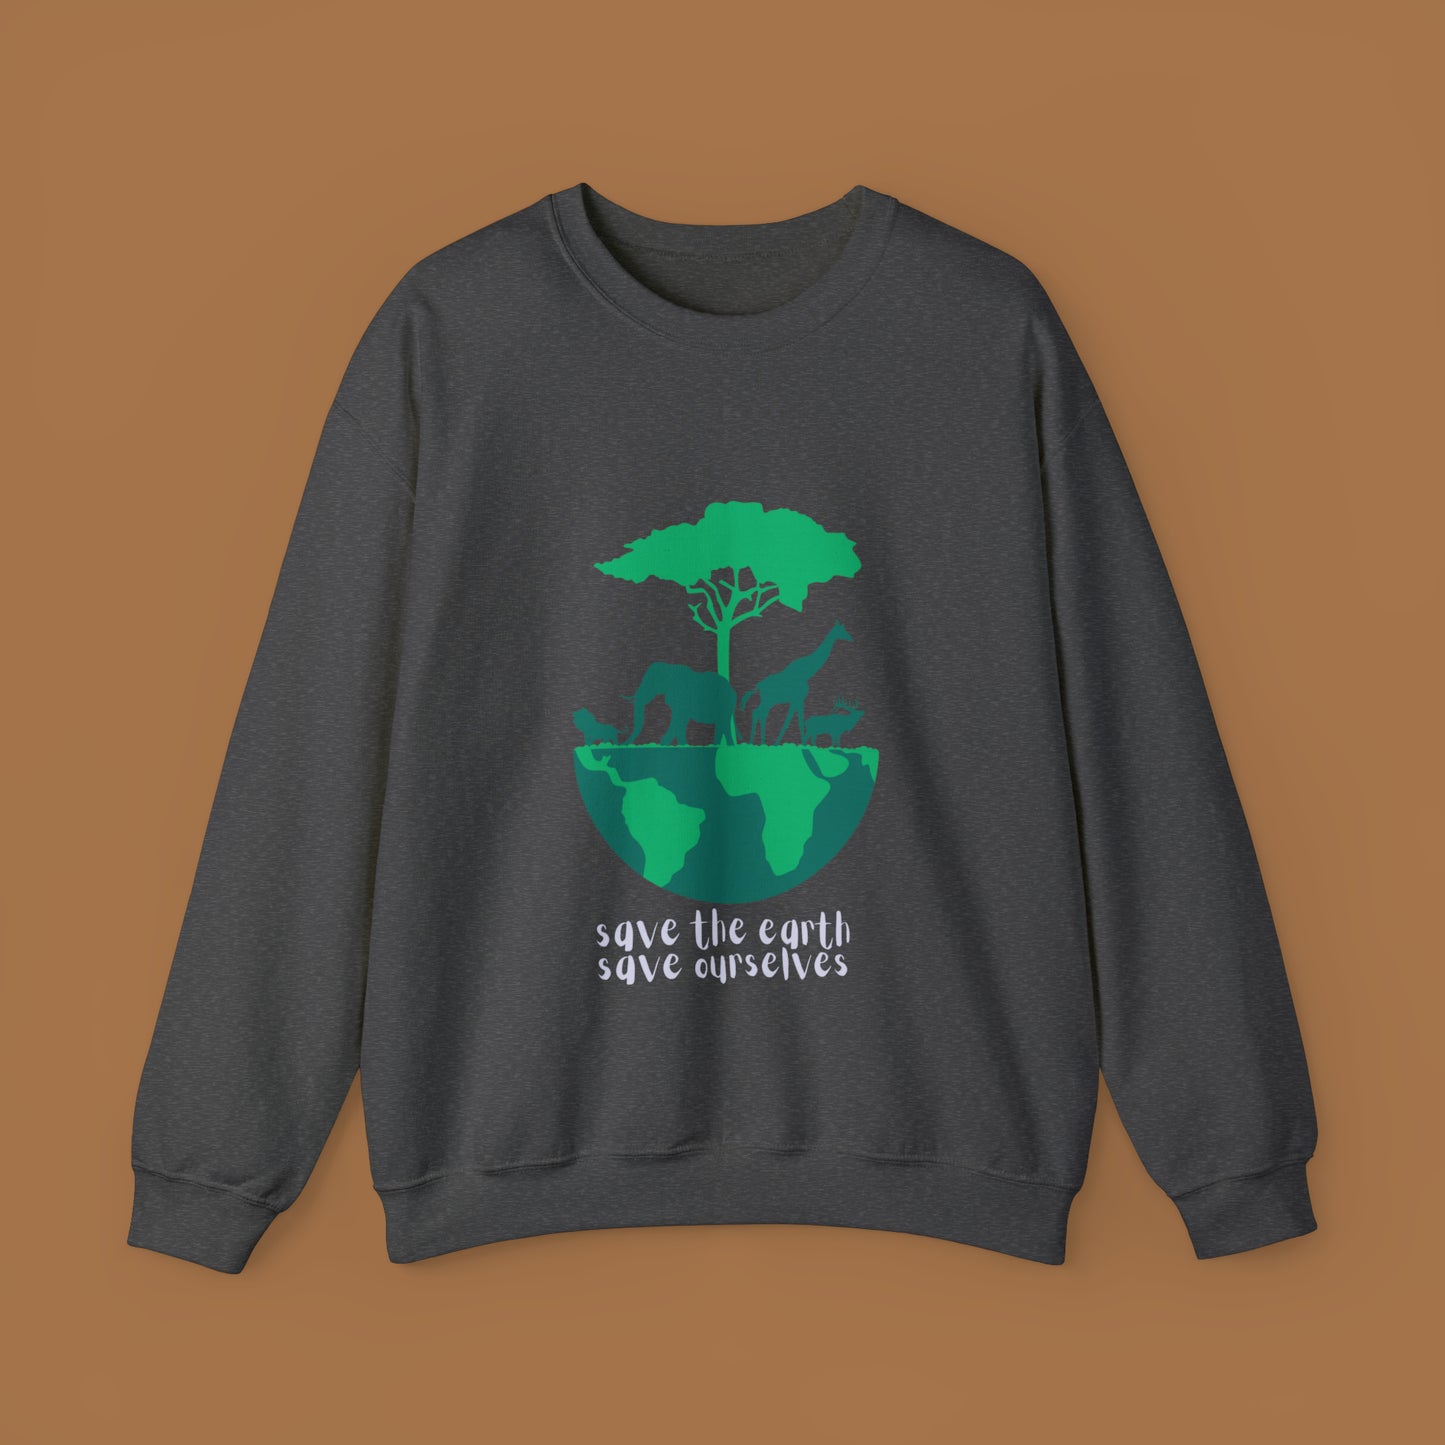 There is indeed no planet B so please let us all commit to "save the earth save ourselves”. This wonderfully designed sweatshirt shows your conviction. Give the gift of this Unisex Heavy Blend™ Crewneck Sweatshirt or get one for yourself.